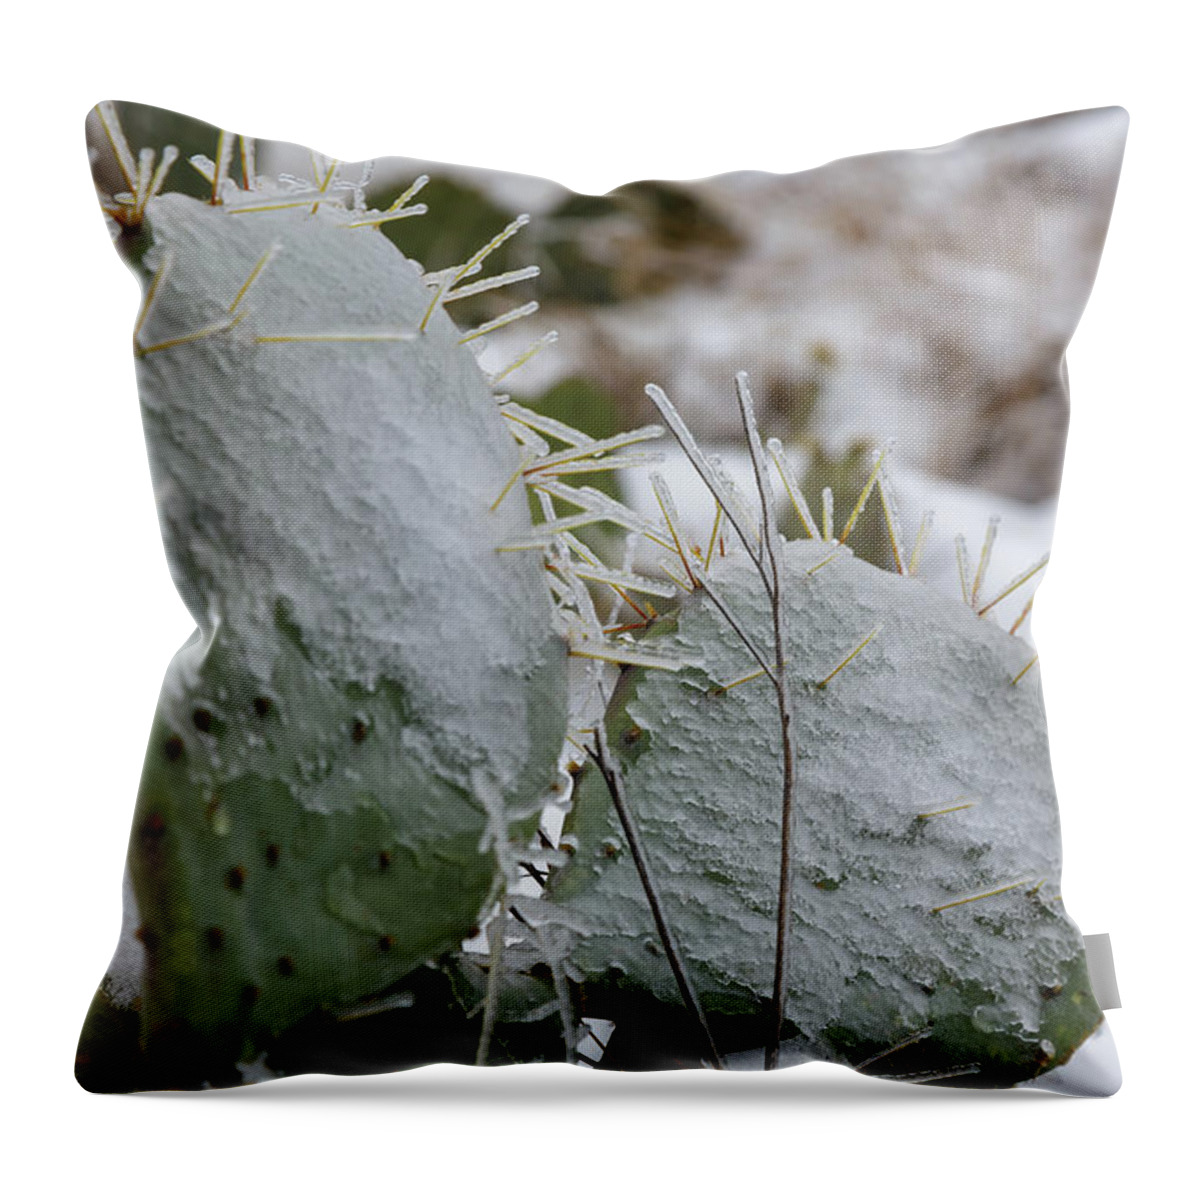 Prickly Throw Pillow featuring the photograph Frozen Prickly Pear by Steve Templeton